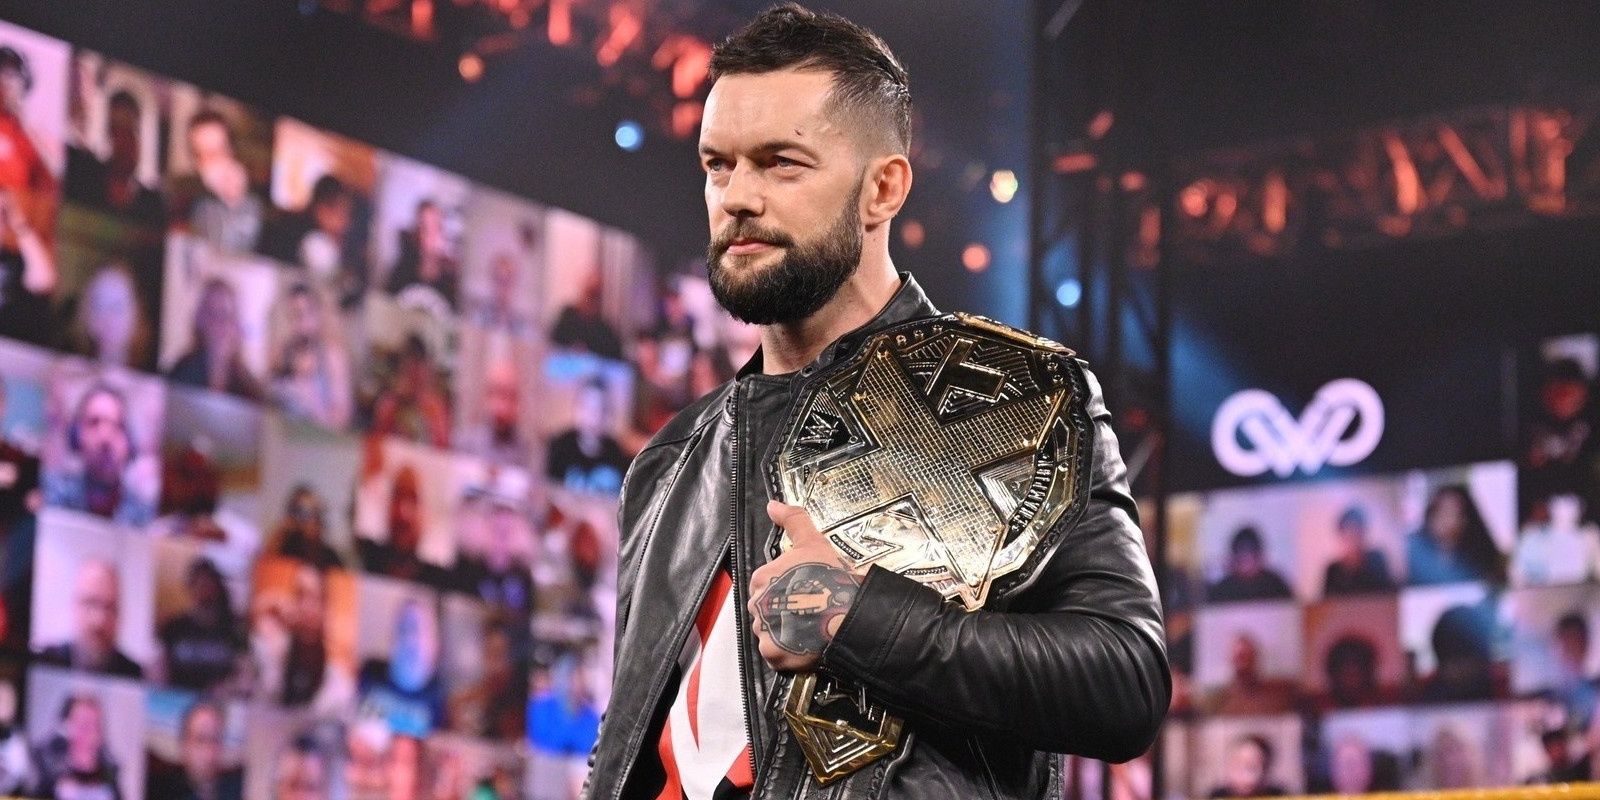 Finn Bálor Returns To SmackDown After A Two-Year Absence